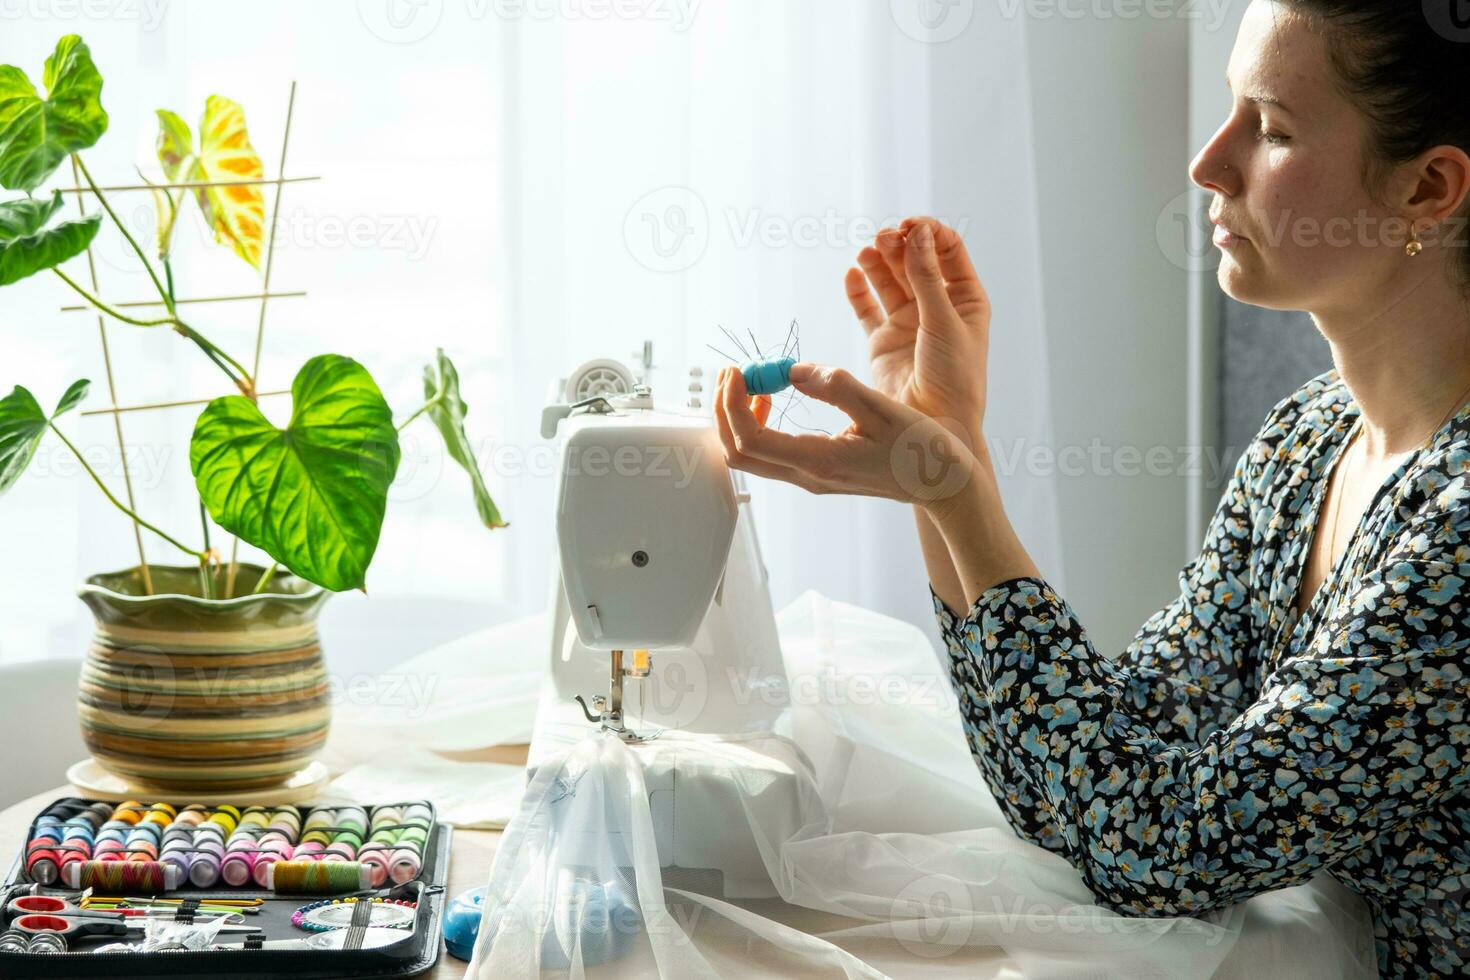 A woman sews tulle on an electric sewing machine in a white modern interior of a house with large windows, house plants. Comfort in the house, a housewife's hobby photo